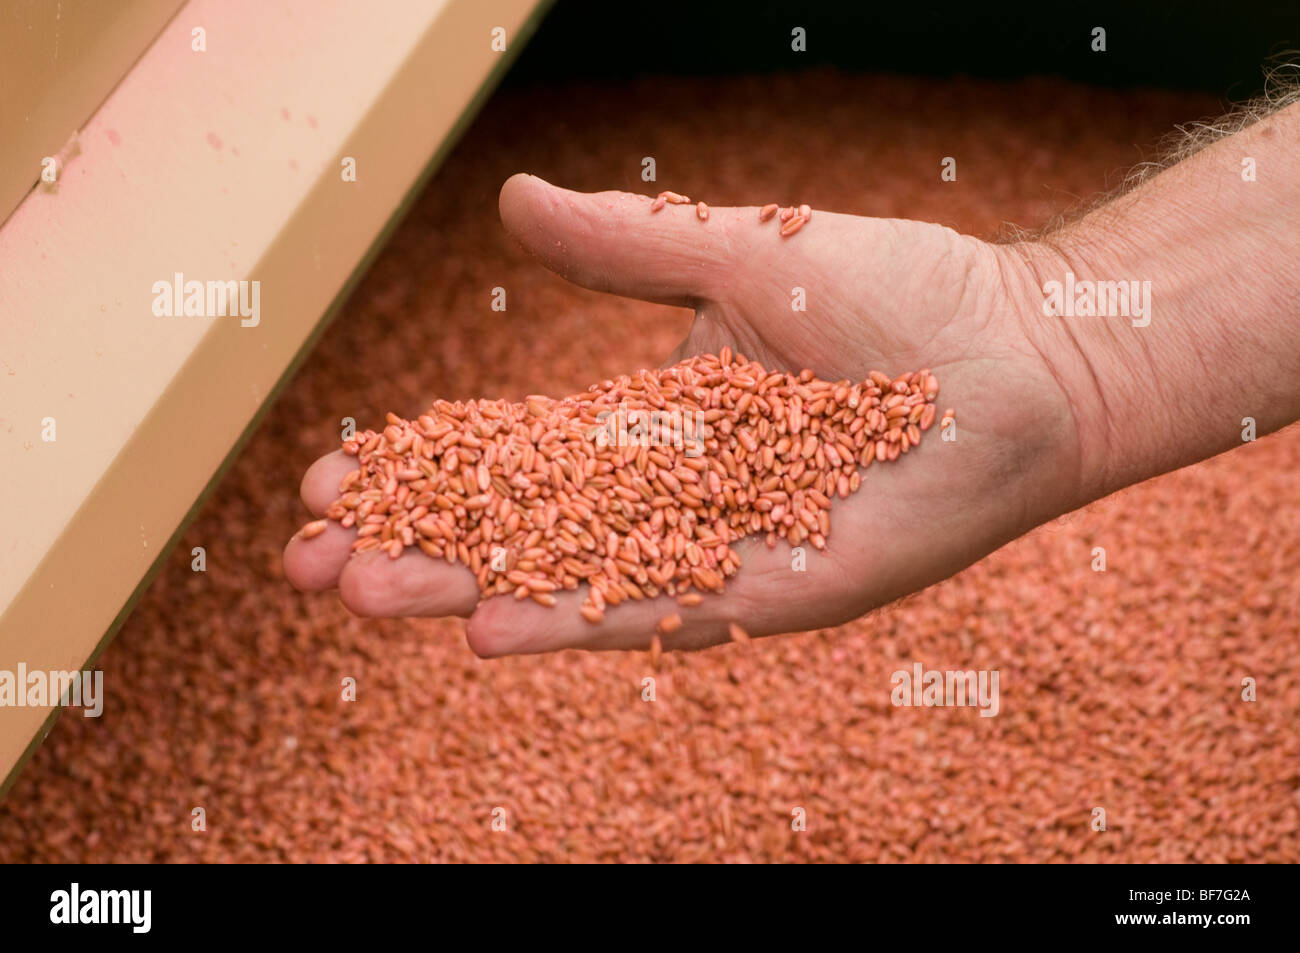 wheat seed in hand Stock Photo